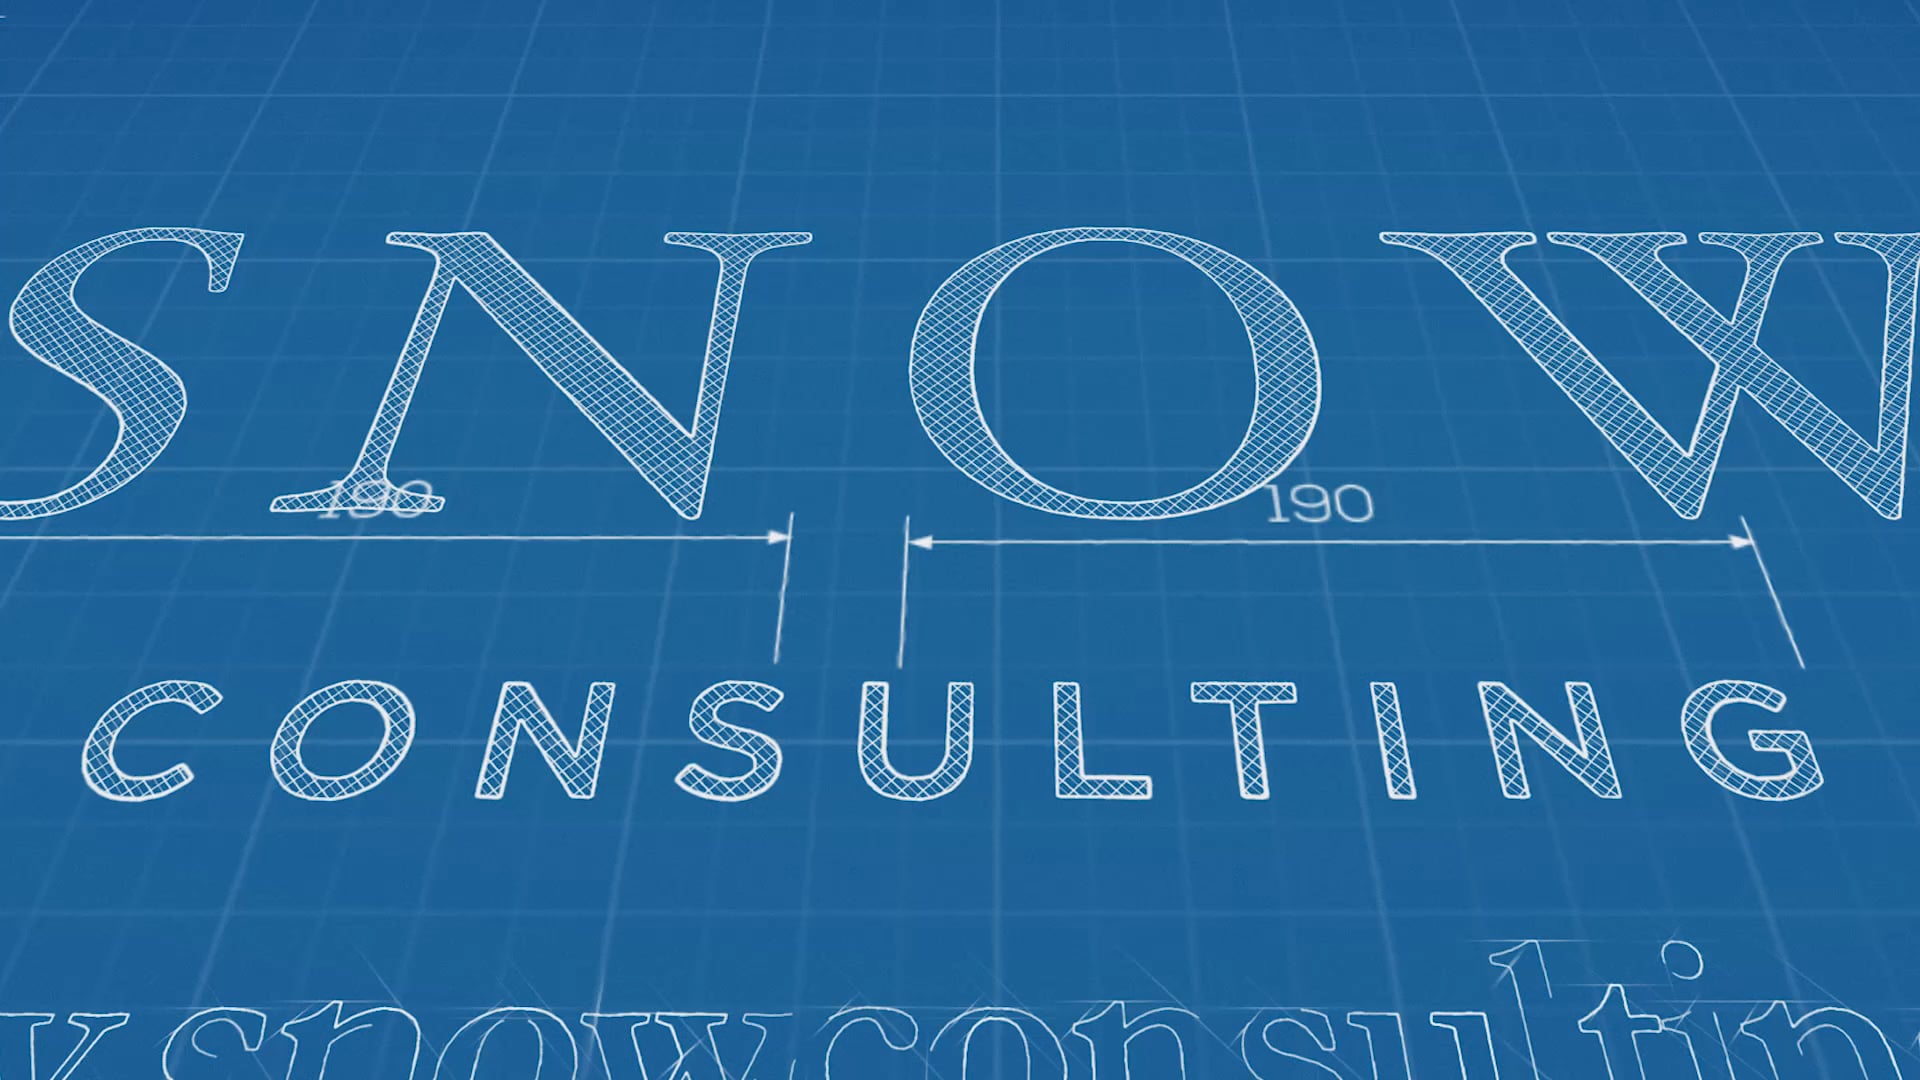 Snow Consulting - Motion Graphic Logo Intro